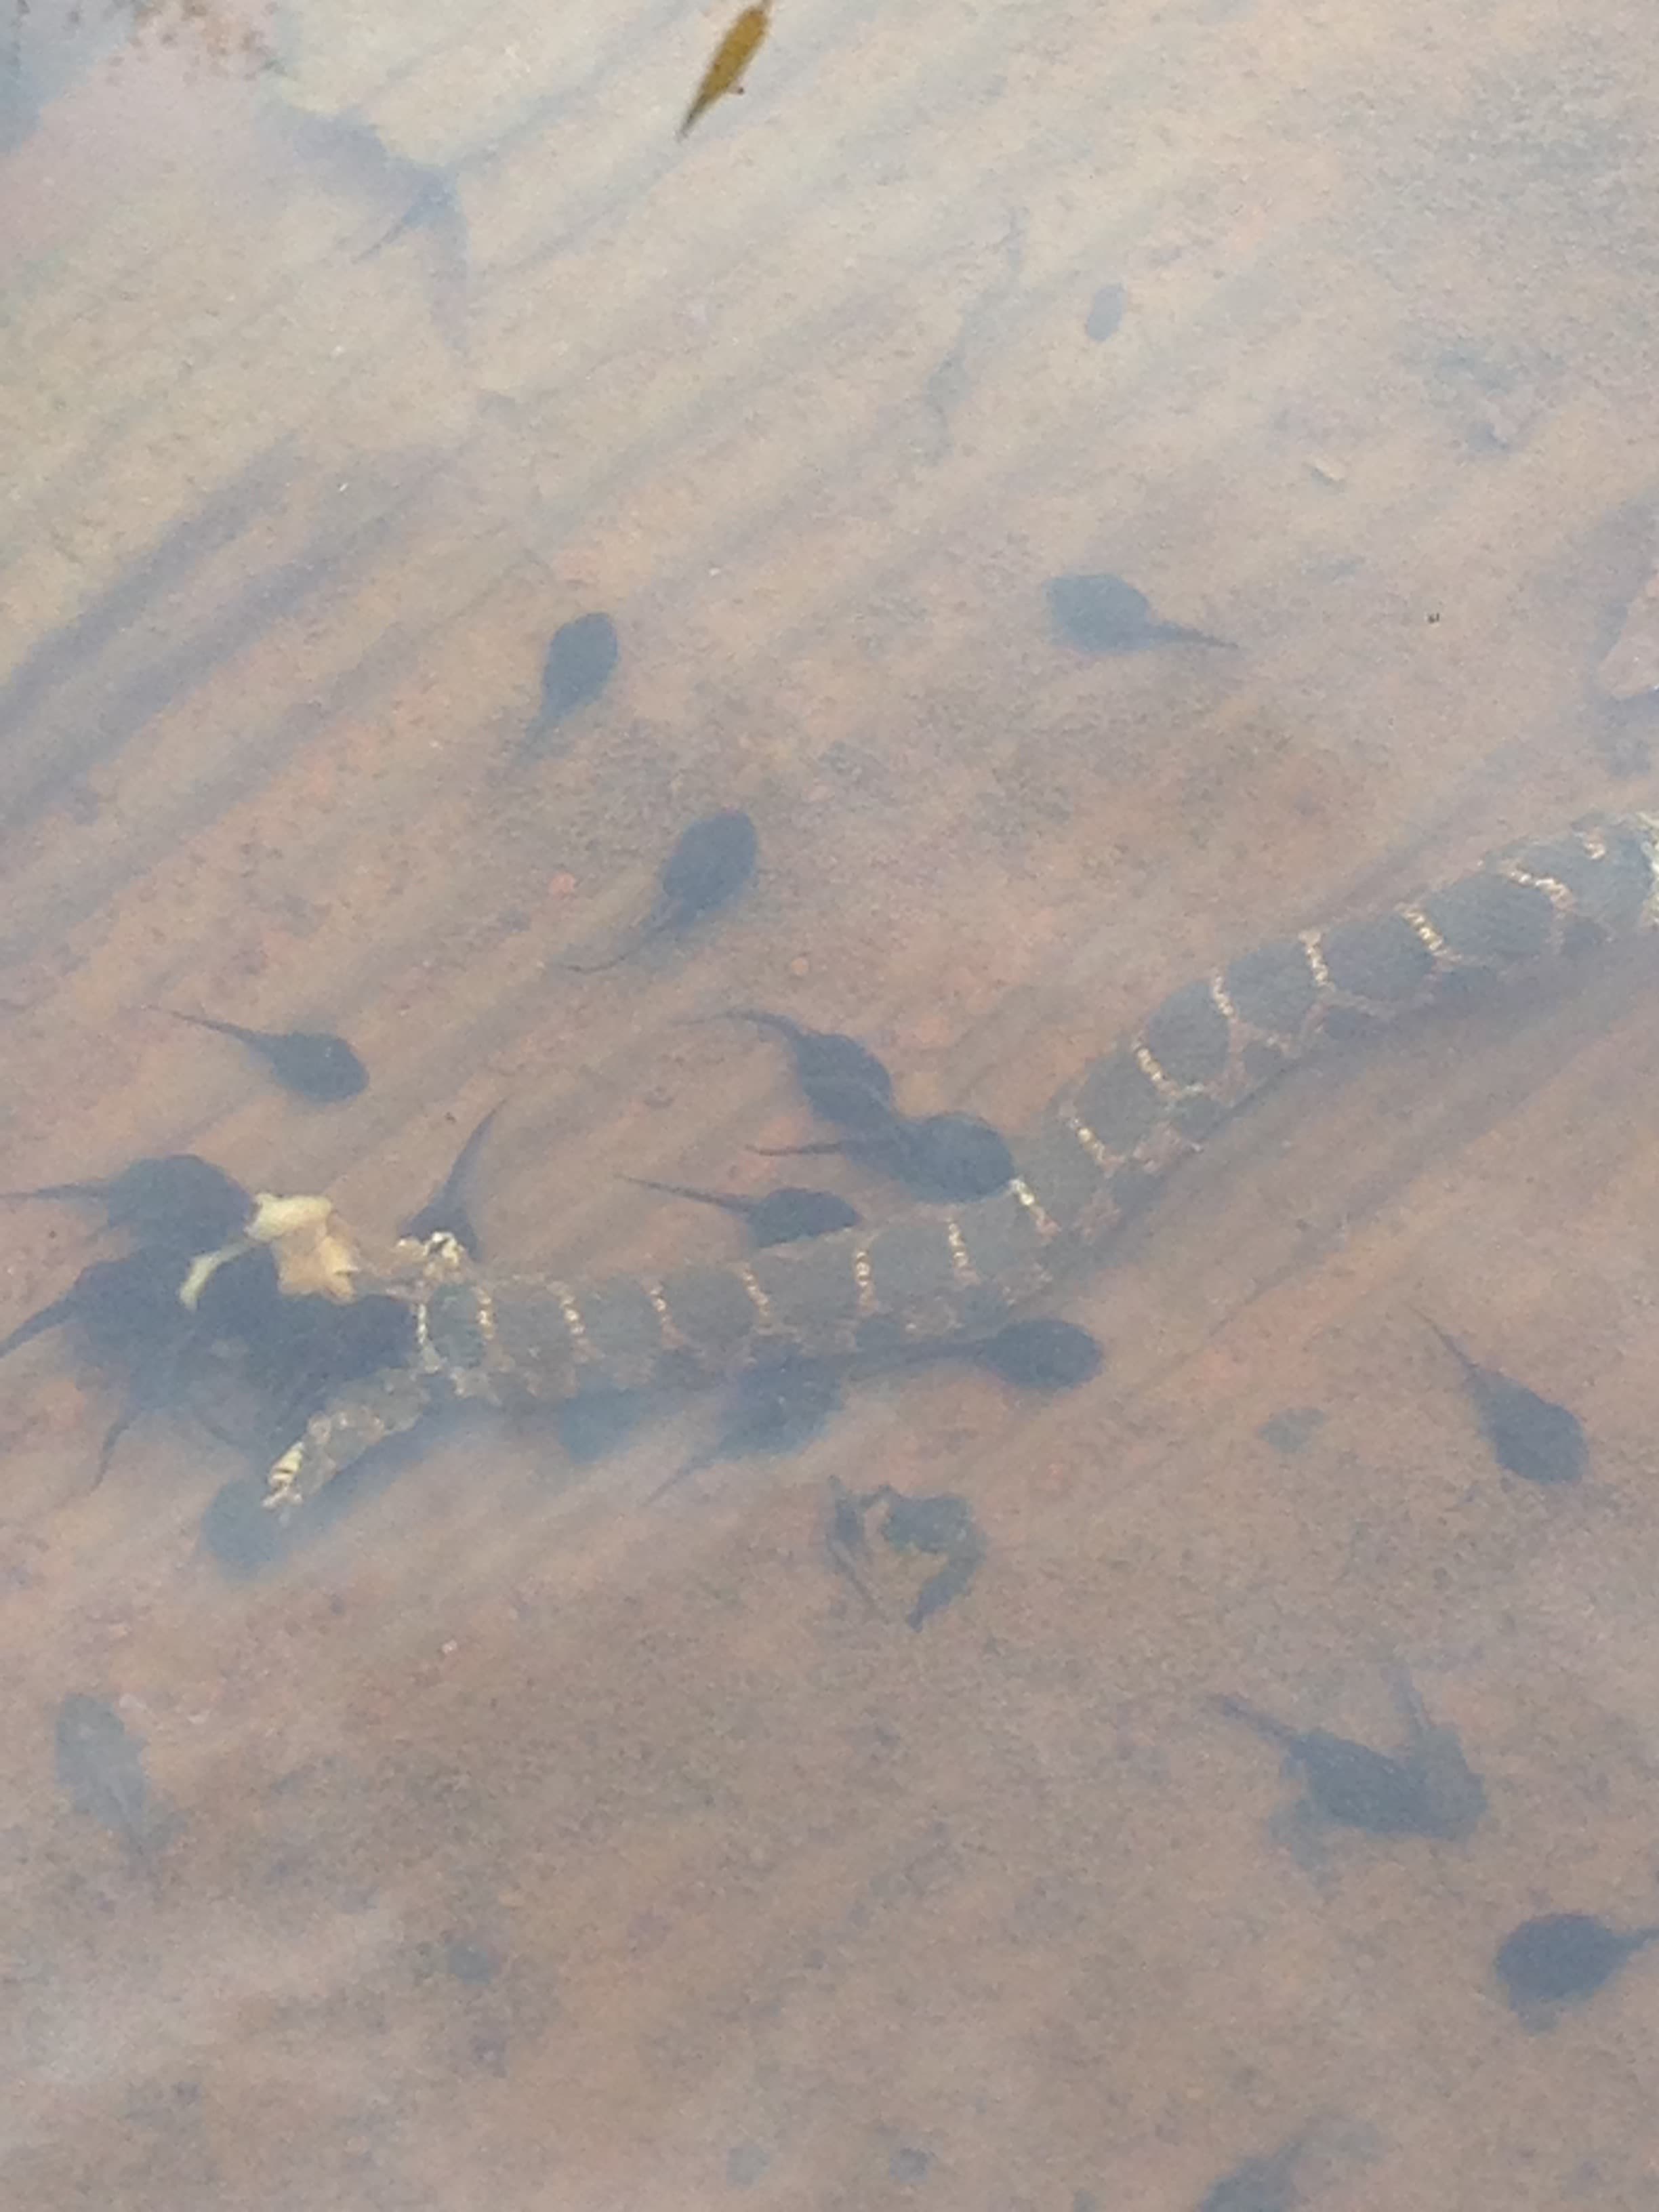 A dead snake lay in the bottom of our swale covered by 3 inches of water. He is being eaten by tadpoles.